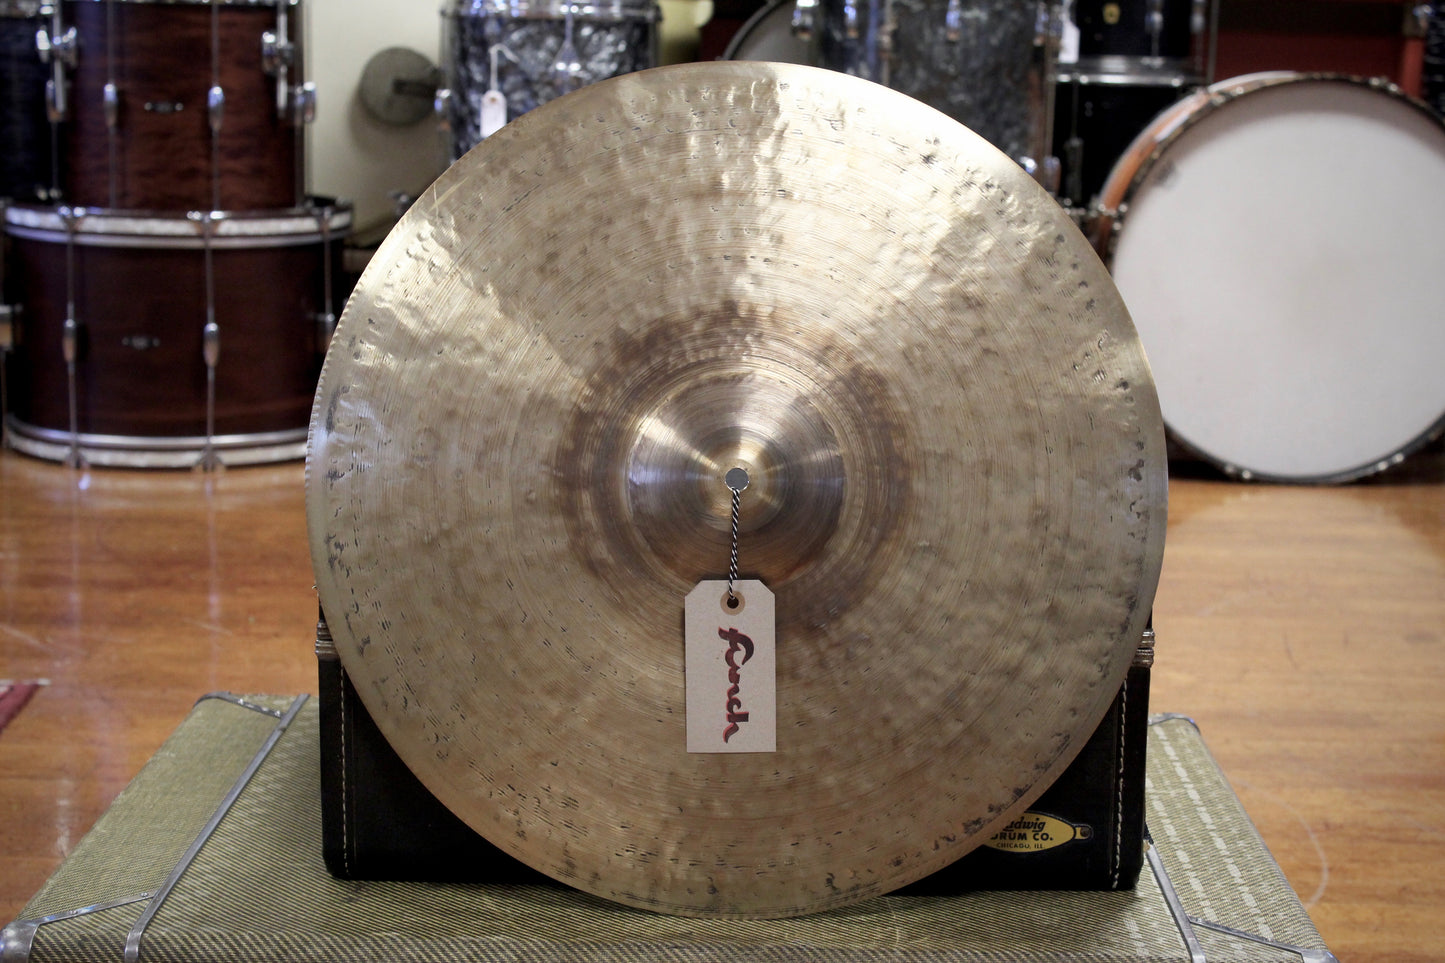 Funch Cymbals 20" Old Stamp IIIa Clone Ride Cymbal 2004g